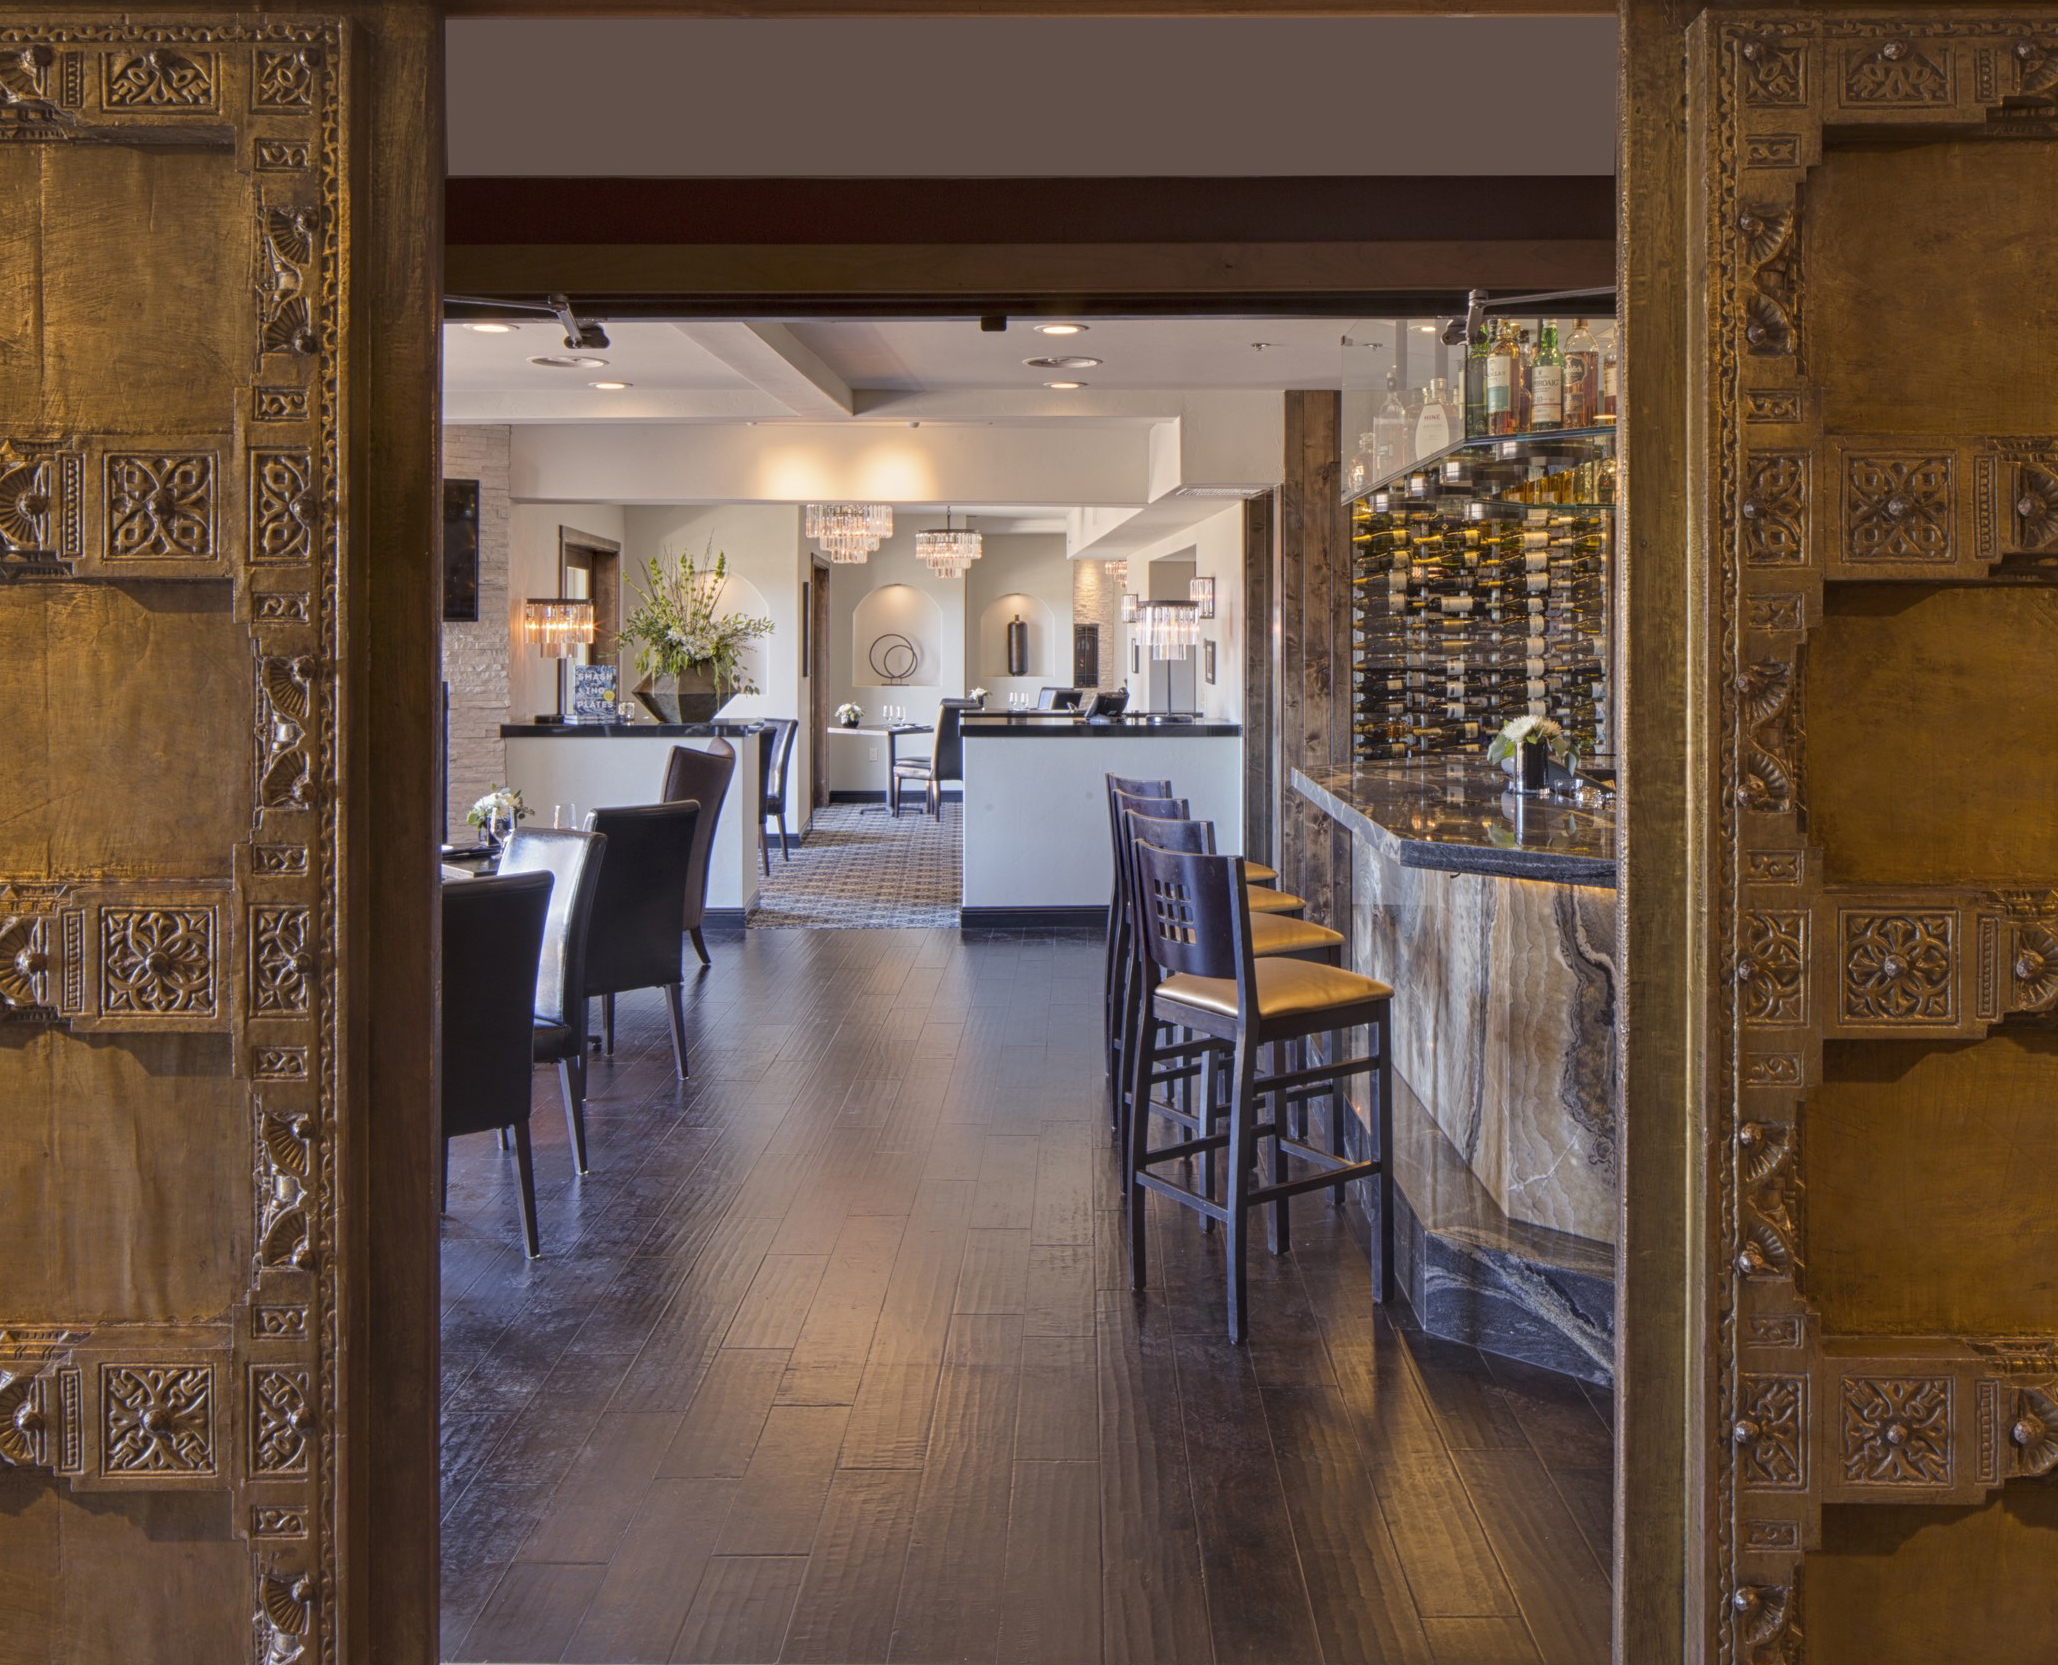 Old World European doors open onto Jimmy’s at The Landing, known for its fresh take on Mediterranean cuisine that won the restaurant top honors in the 2017 Best of Tahoe “Fine Dining" category.